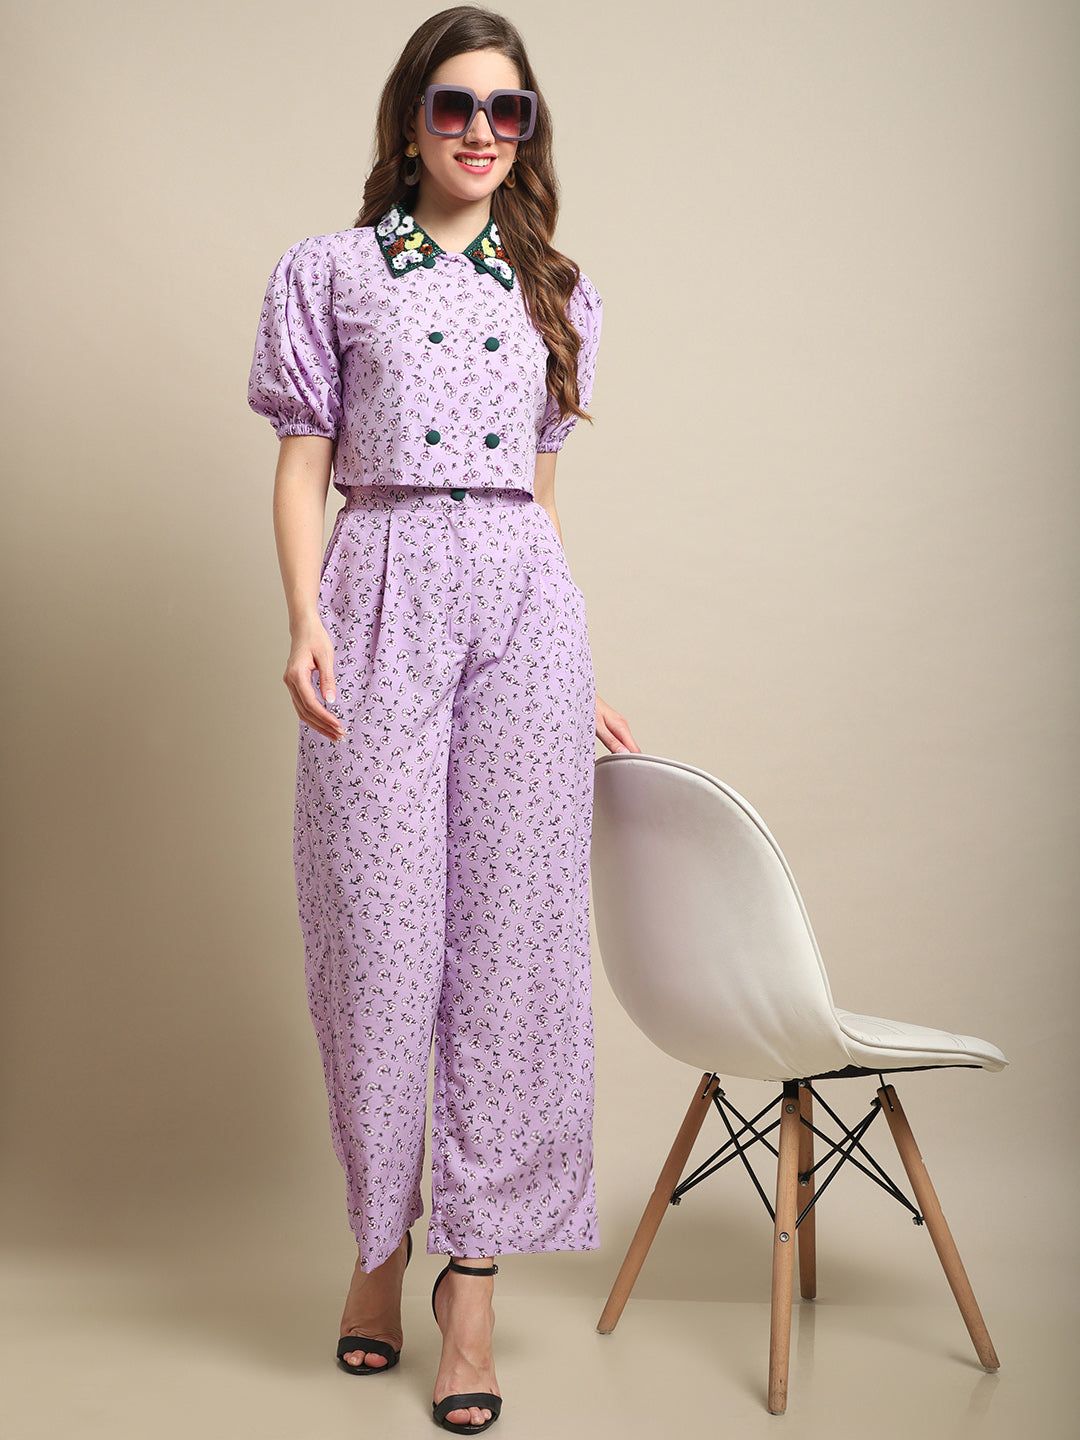 Blanc9 Embellished Collar Top With Purple Printed Co-Ord Set